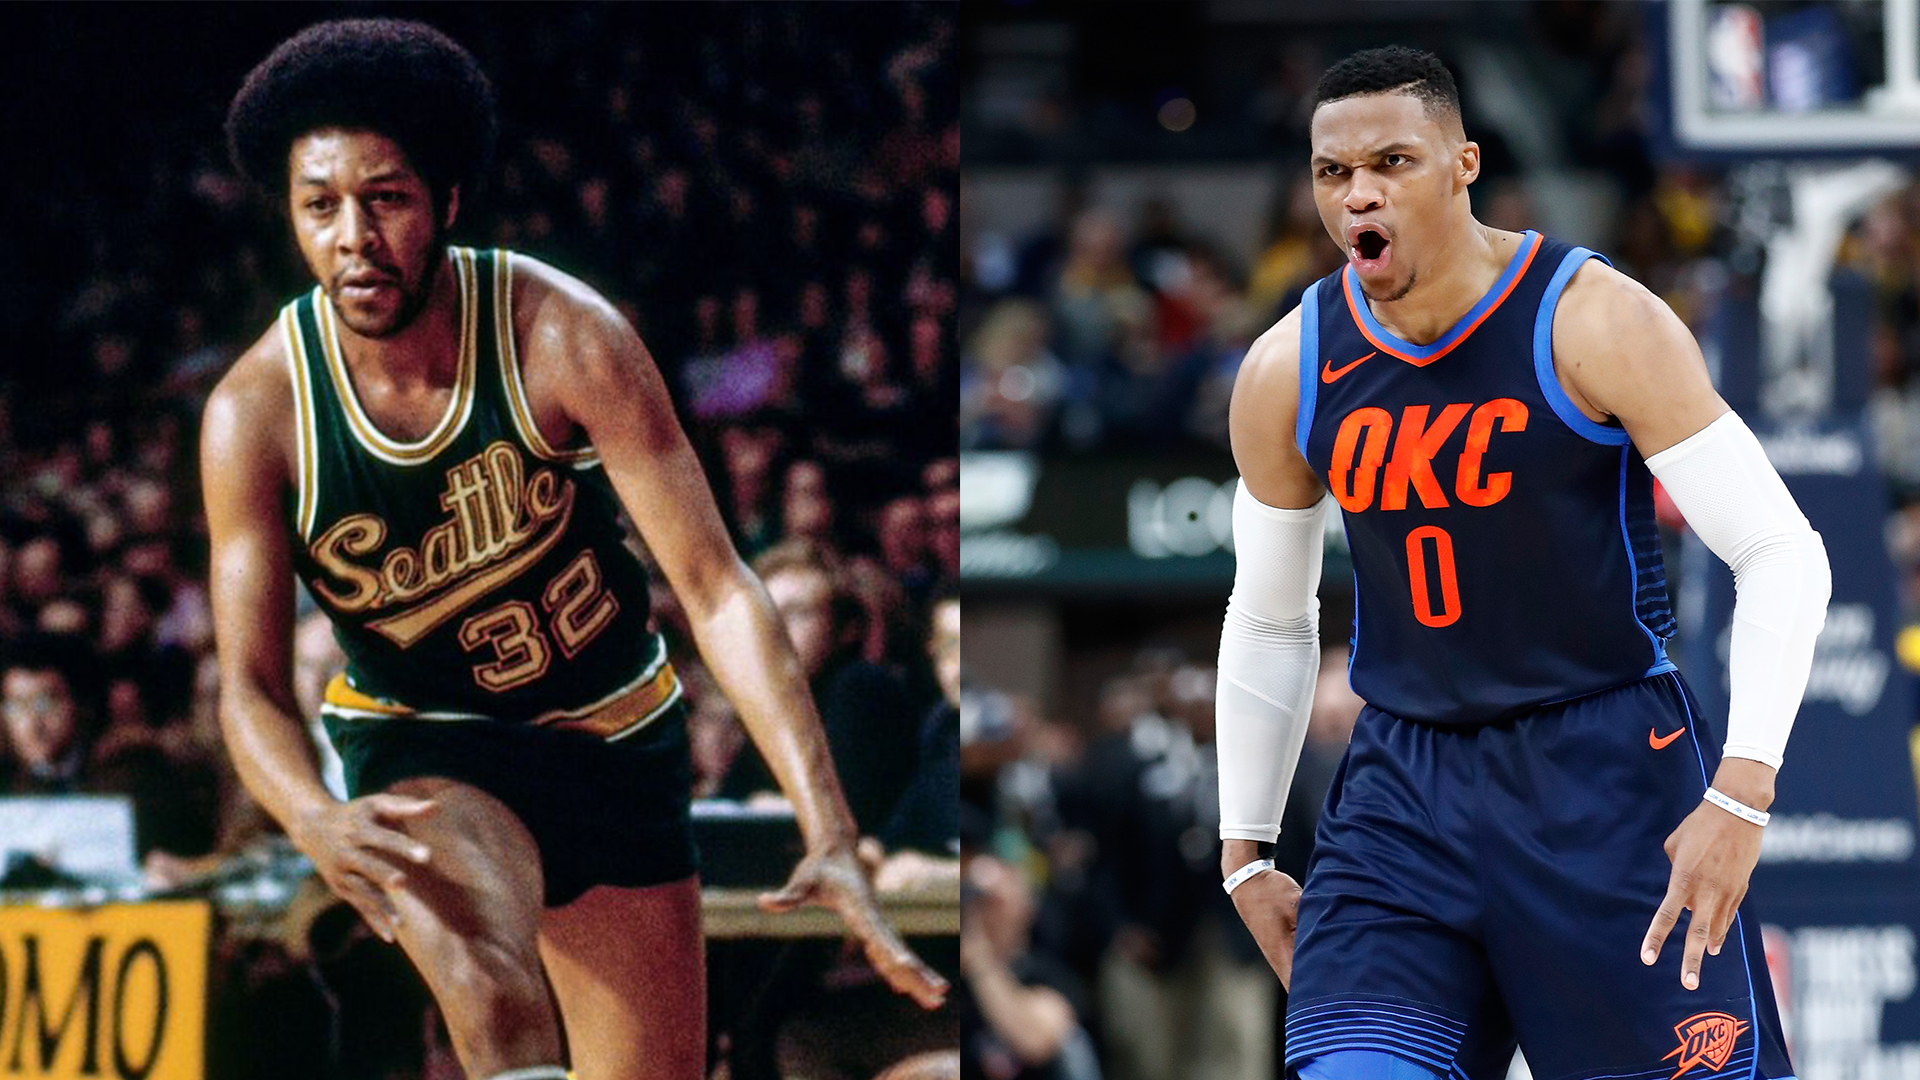 <strong>Oklahoma City Thunder: Fred Brown (l.) &amp; Russell Westbrook</strong><br>Punkte: 58<br>Jahr und Gegner: 1974 vs. Golden State Warriors (Brown), 2017 vs. Portland Trail Blazers (Westbrook)